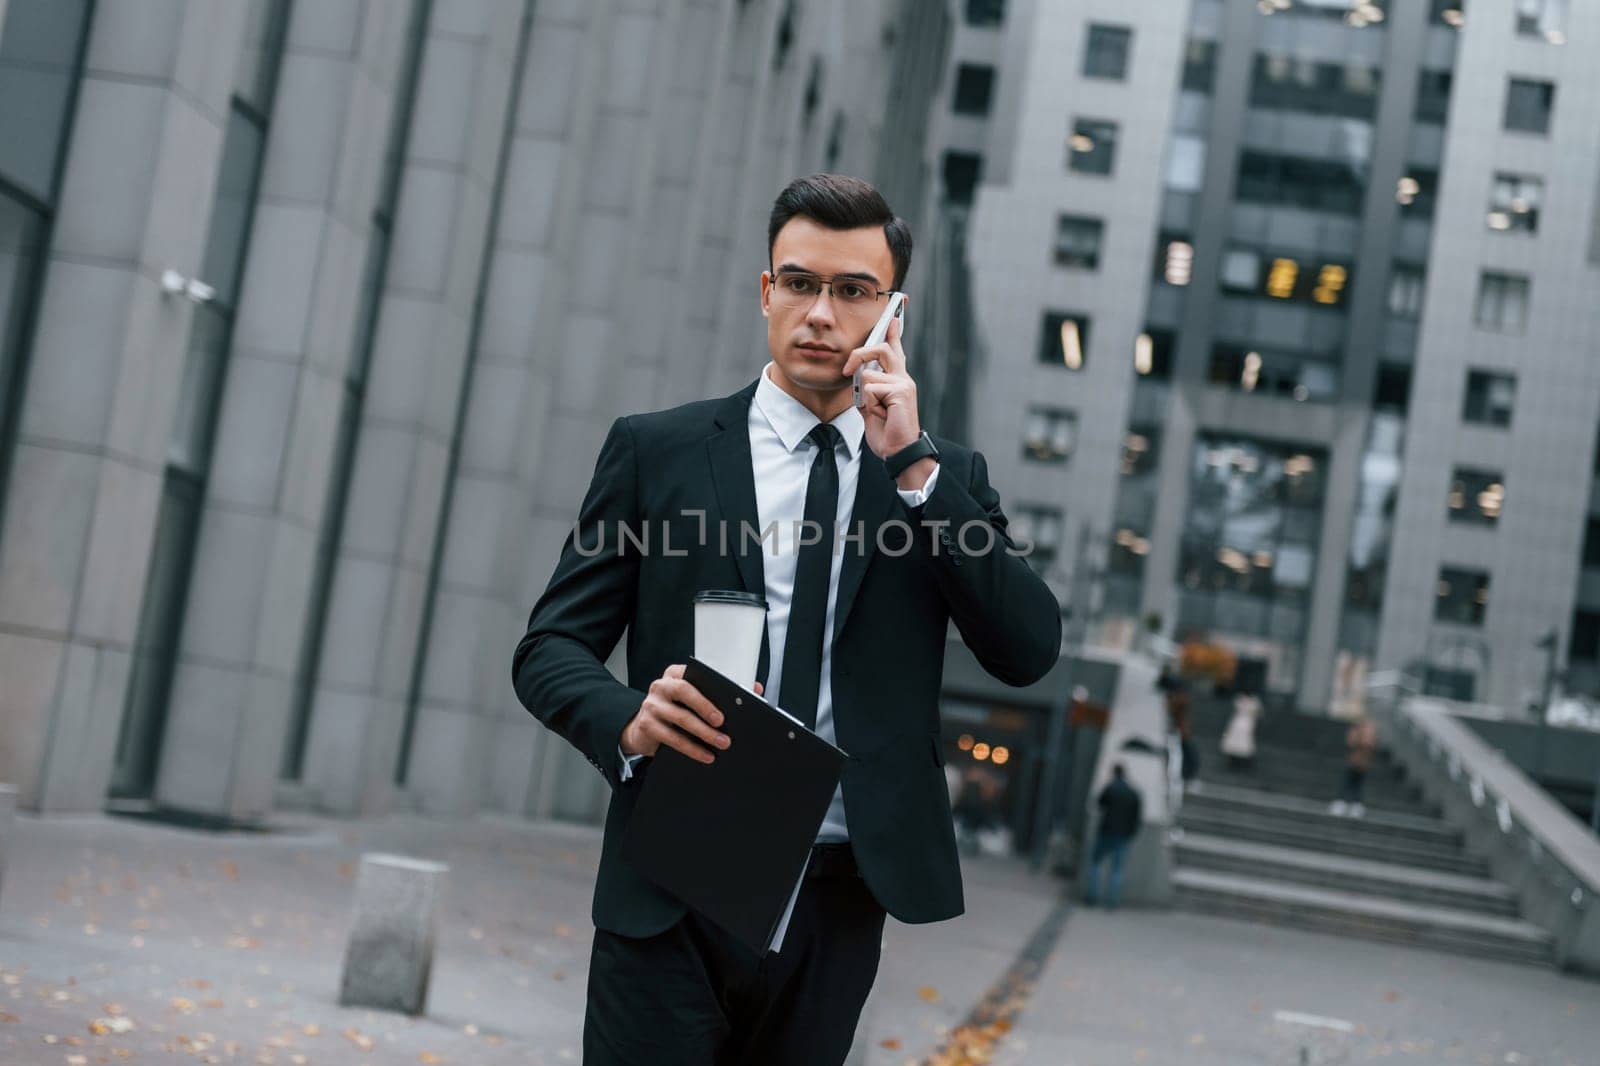 Walking and talking by phone. Businessman in black suit and tie is outdoors in the city.